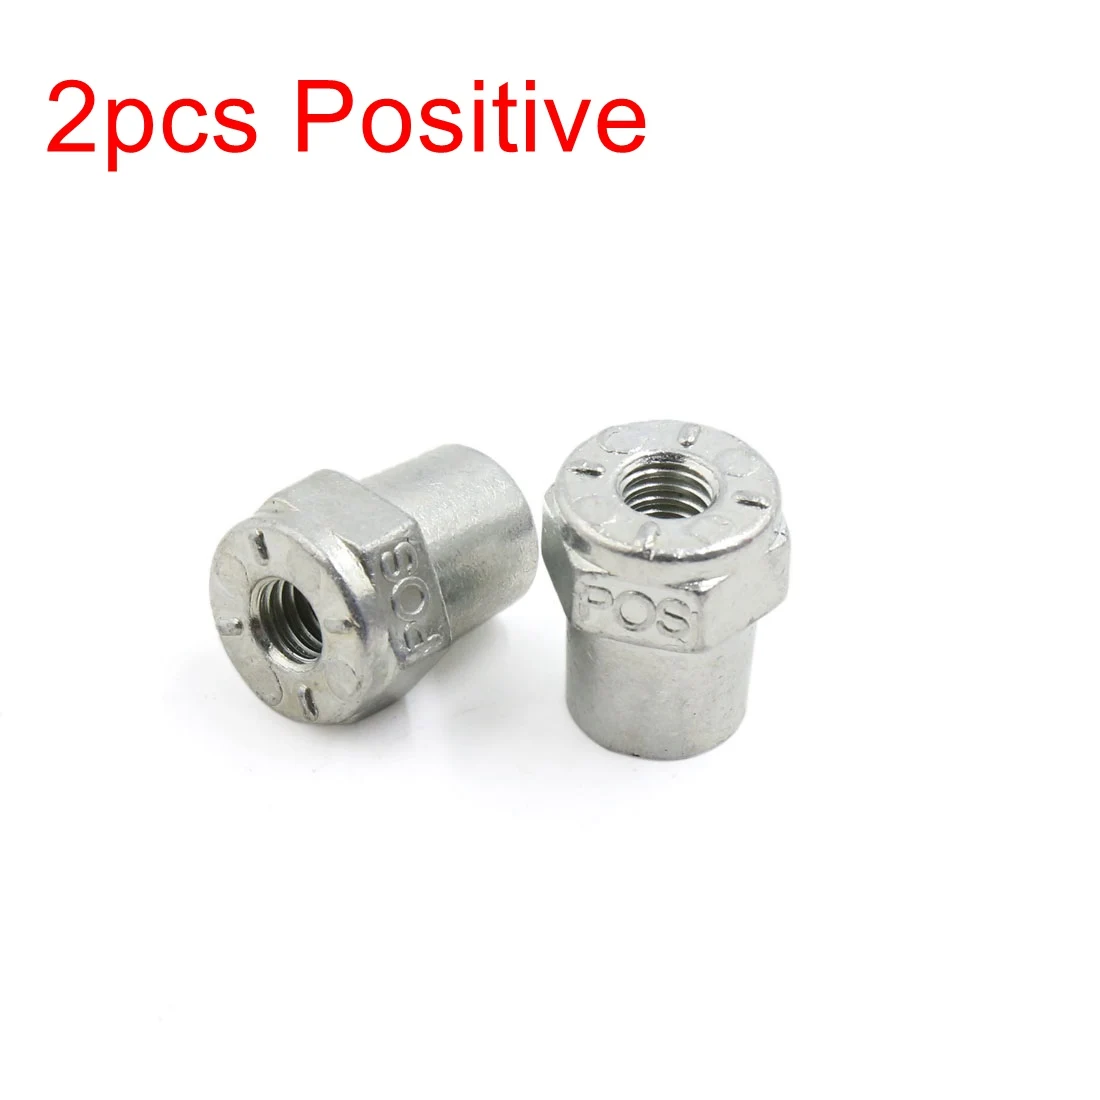 uxcell 2pcs Zinc Alloy Positive Negative Battery Post Terminal Adapters for Car 